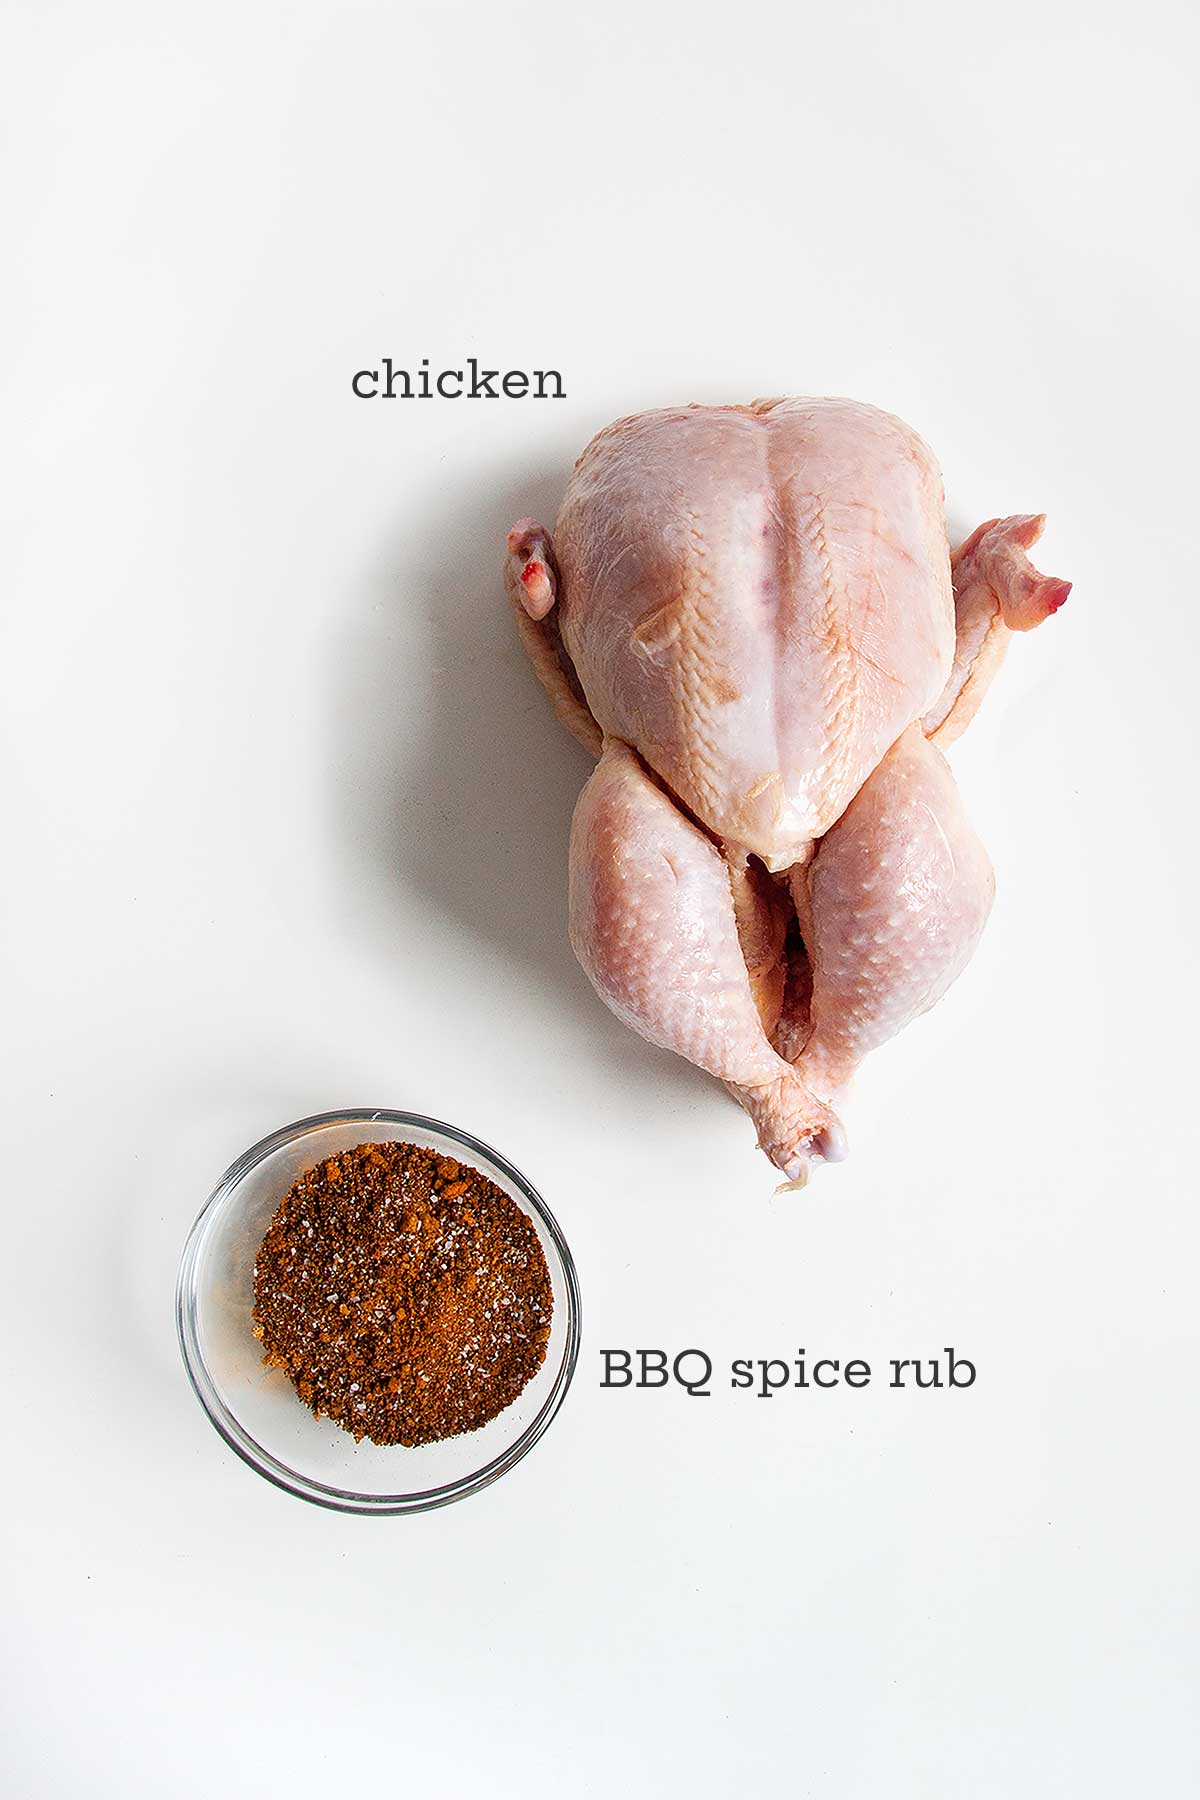 Ingredients for smoked chicken -- a whole chicken and a bowl of BBQ spice rub.